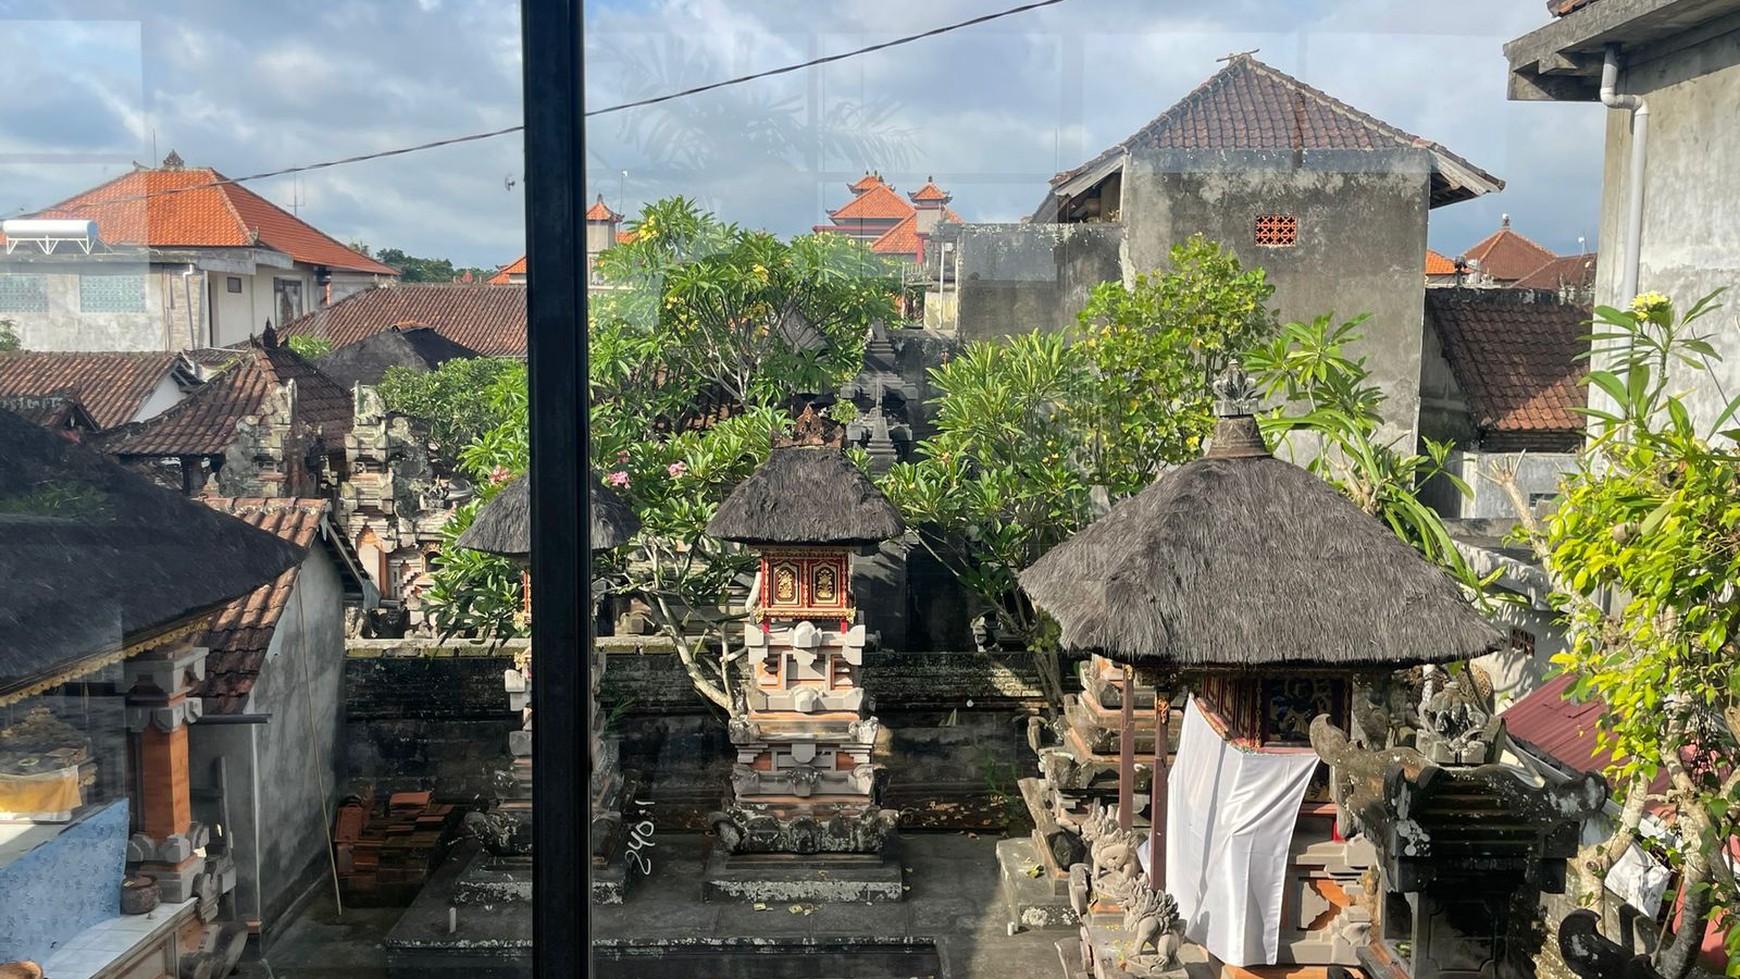 For Sale, A Beautiful 1 Bedroom Leasehold City House In great Location - Heart Of Ubud